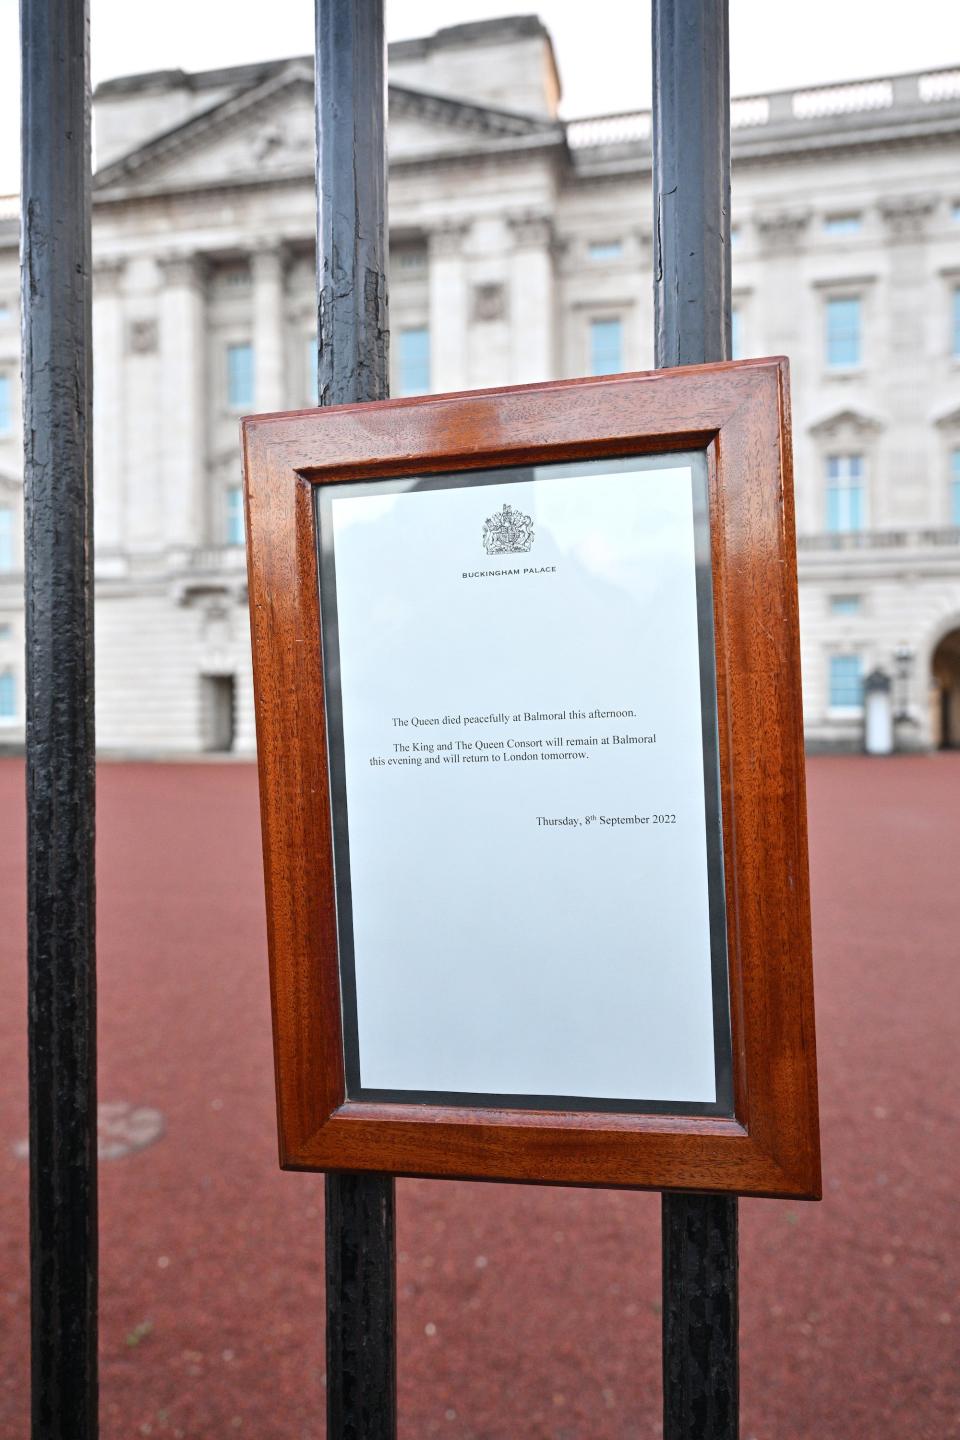 The Queen's death announcement is posted at Buckingham Palace.